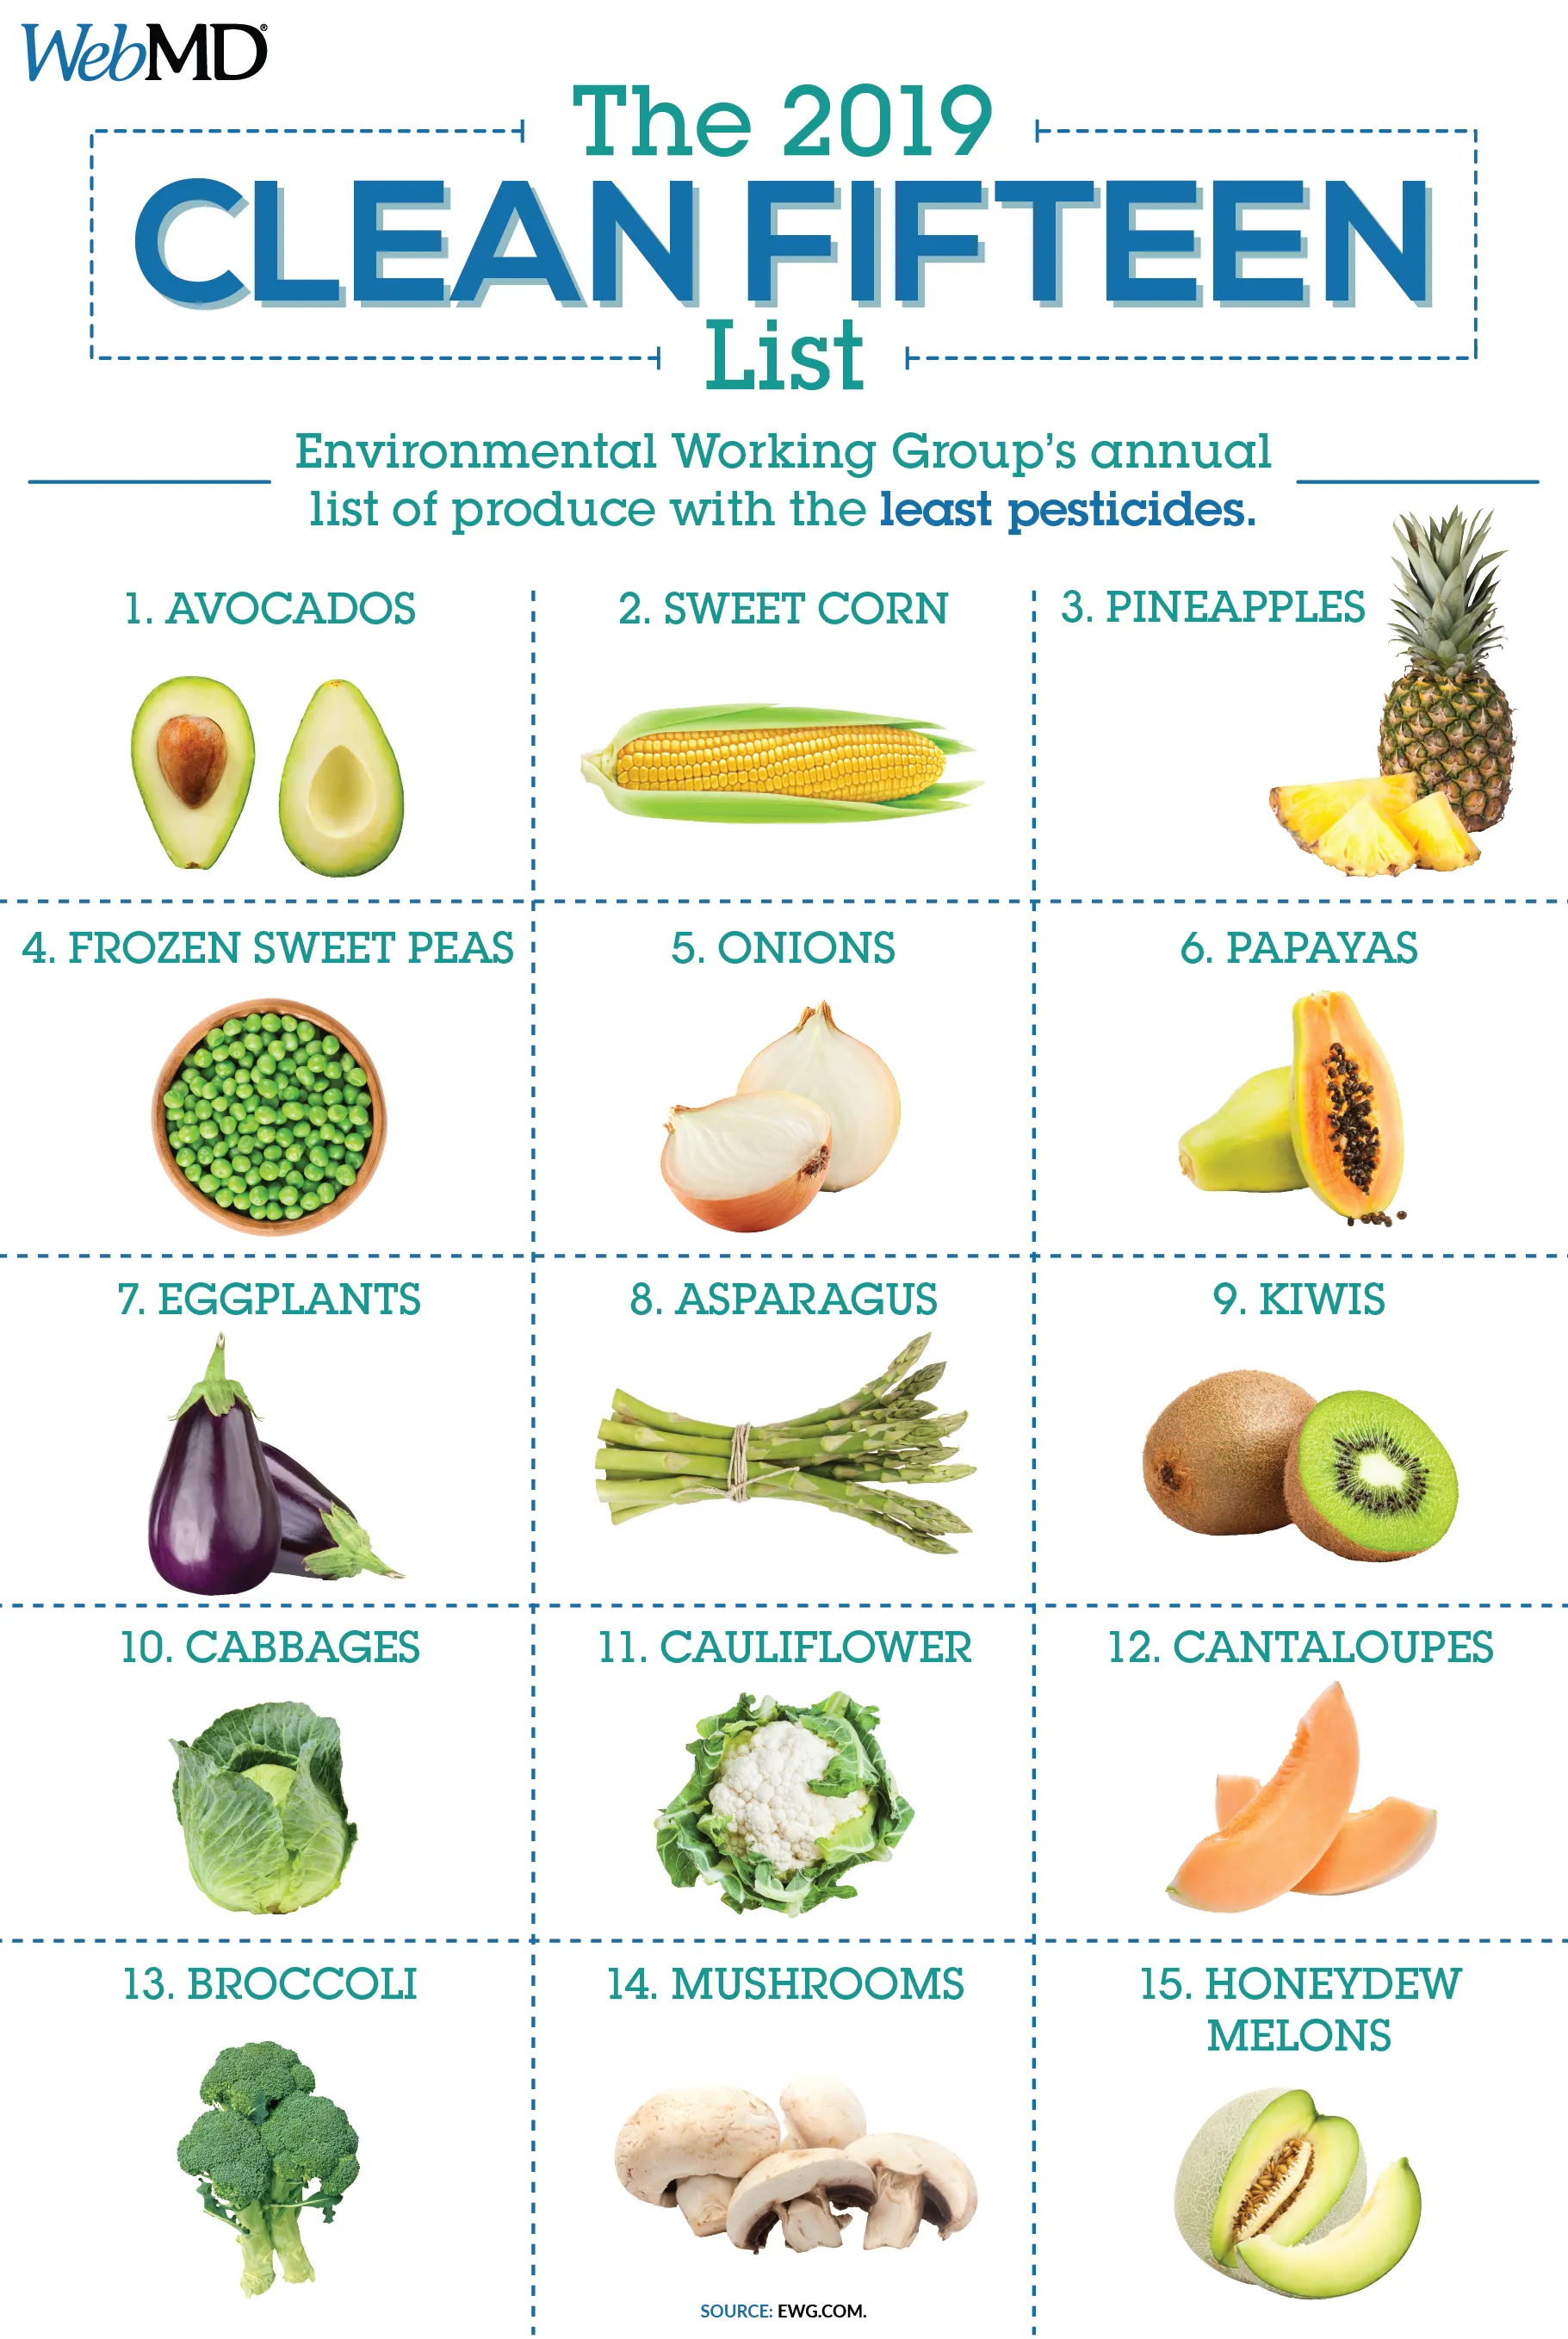 Organic Vs Conventional Foods Chart